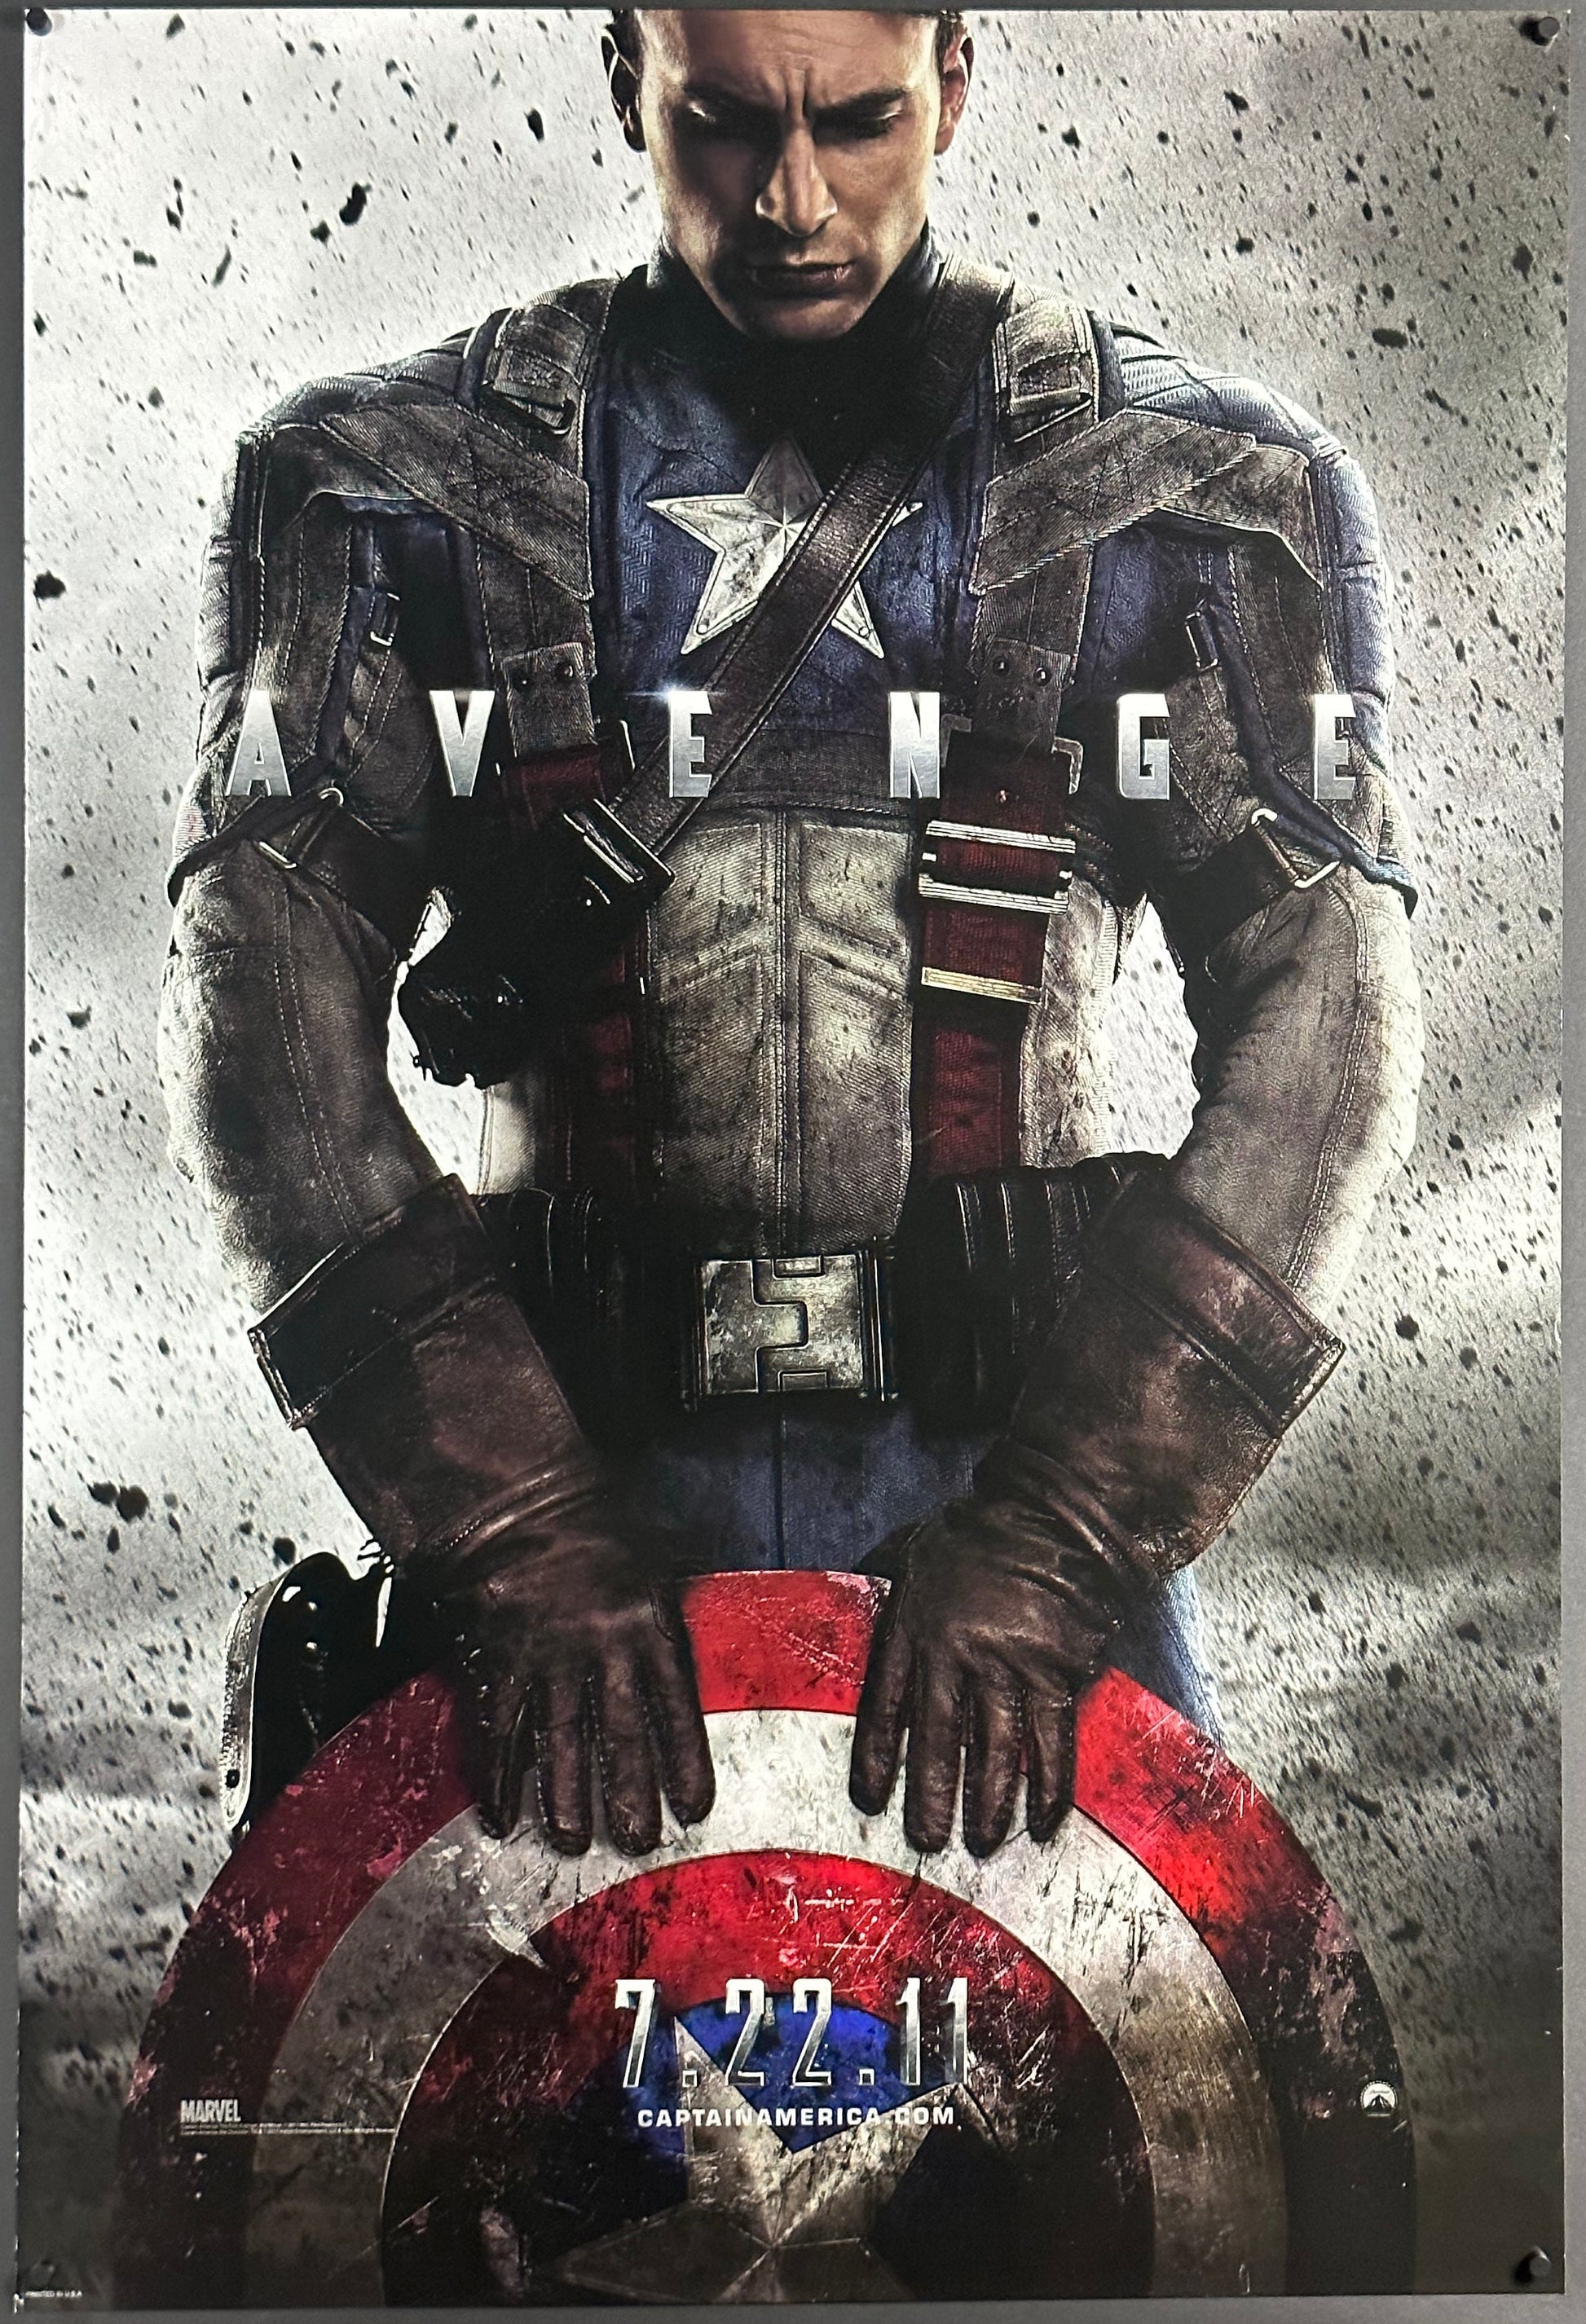 Captain America: The First Avenger US One Sheet Teaser Style (2011) - ORIGINAL RELEASE - posterpalace.com